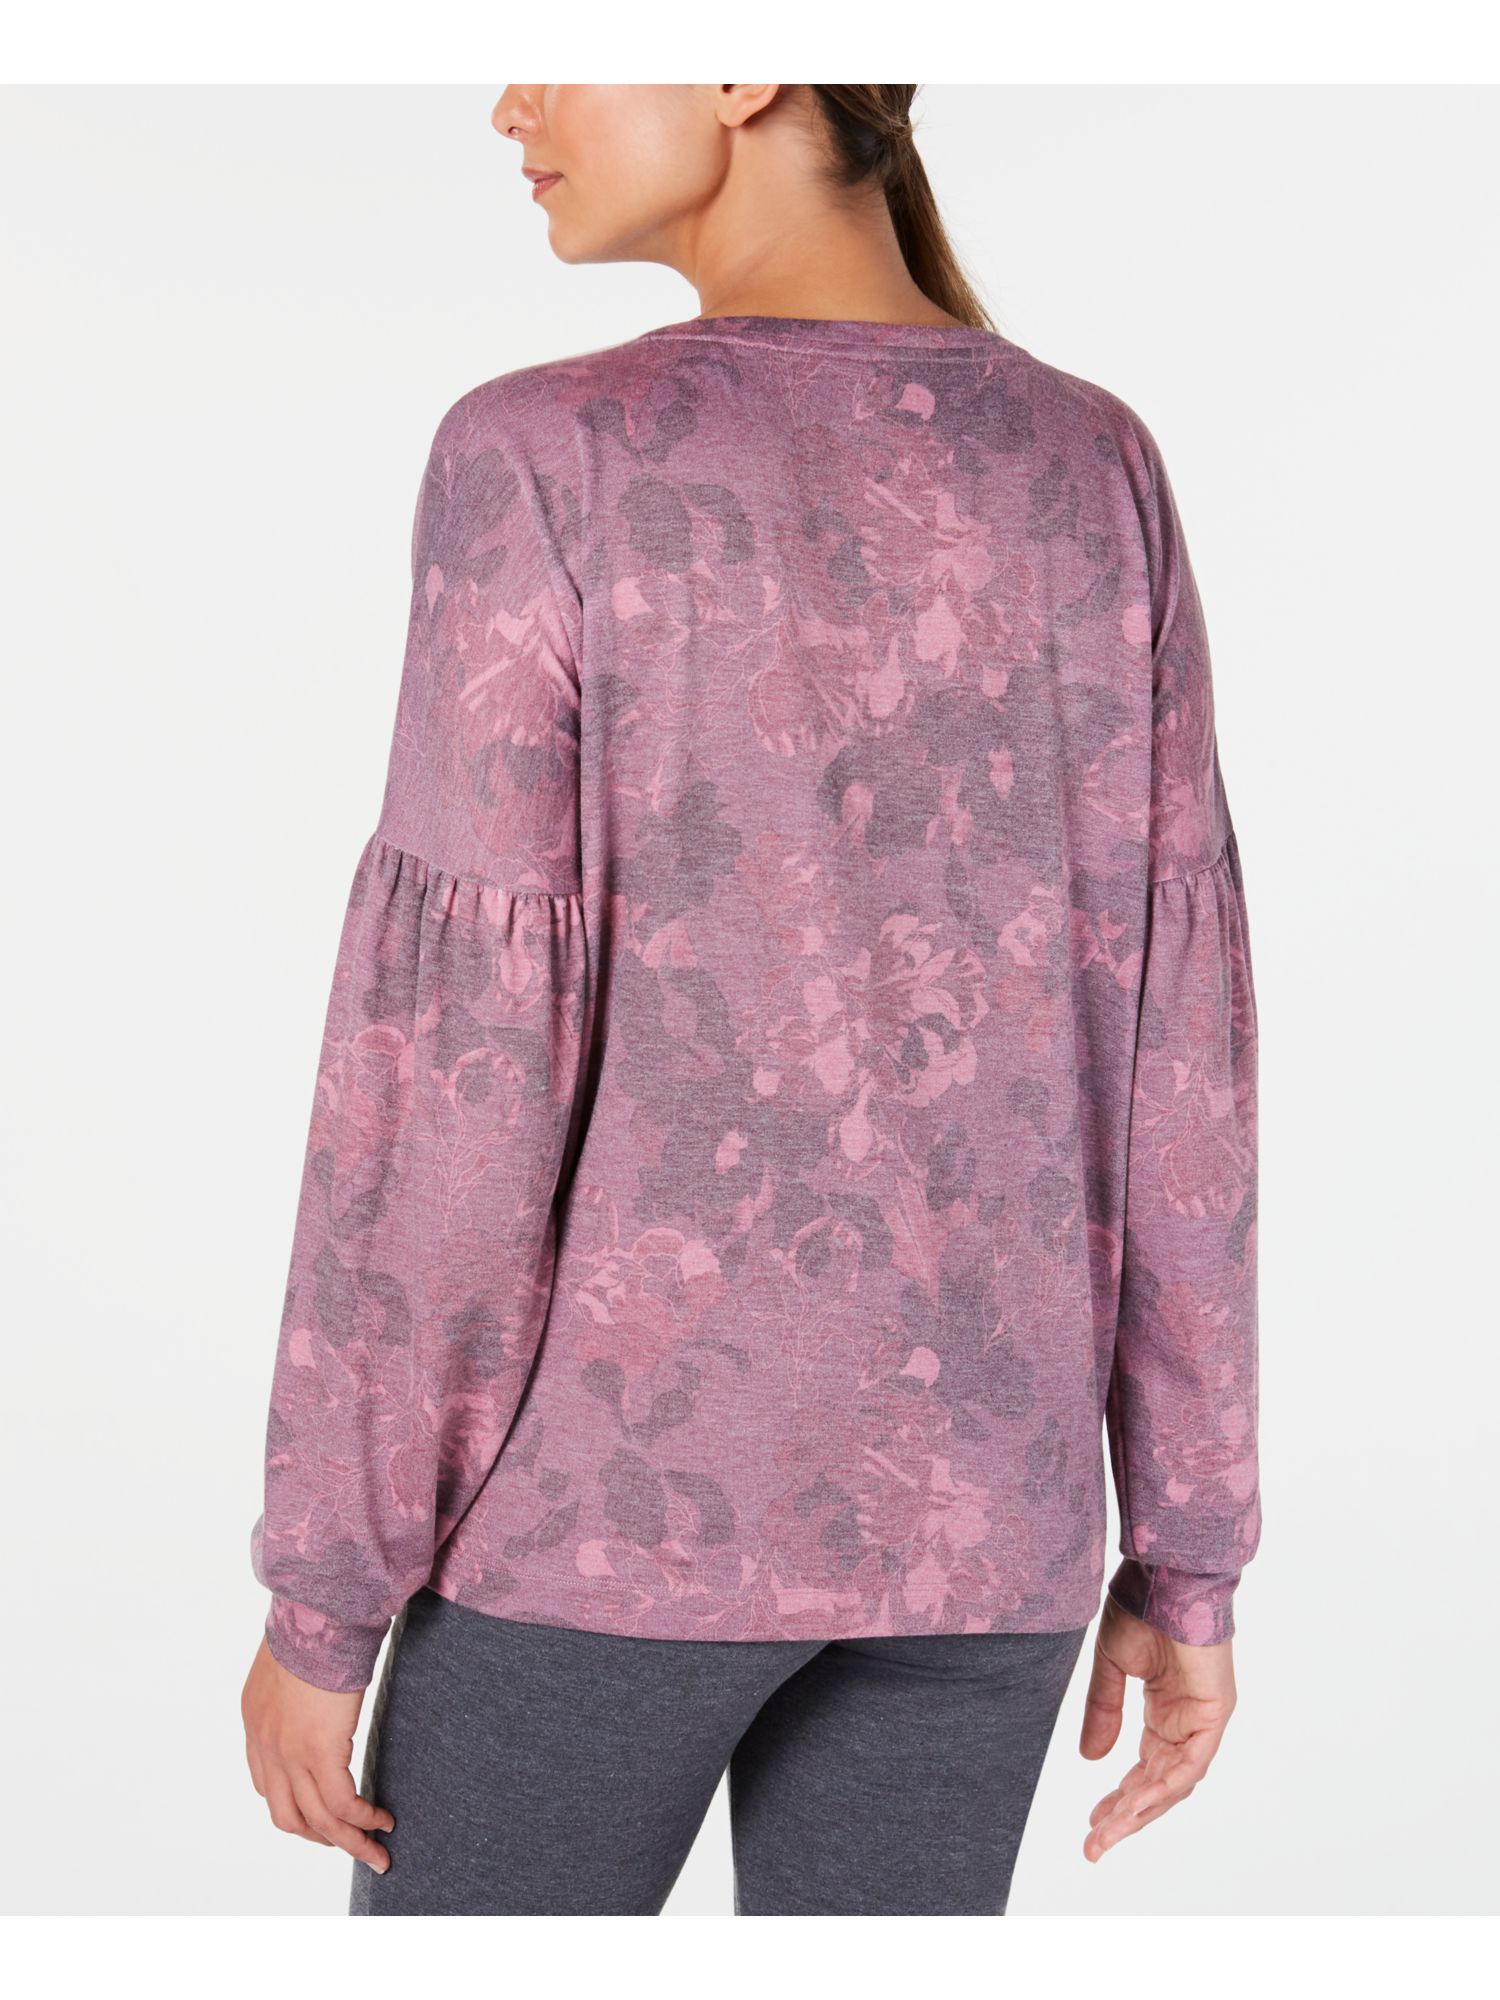 IDEOLOGY Womens Pink Floral Long Sleeve Jewel Neck Top XS - image 2 of 4